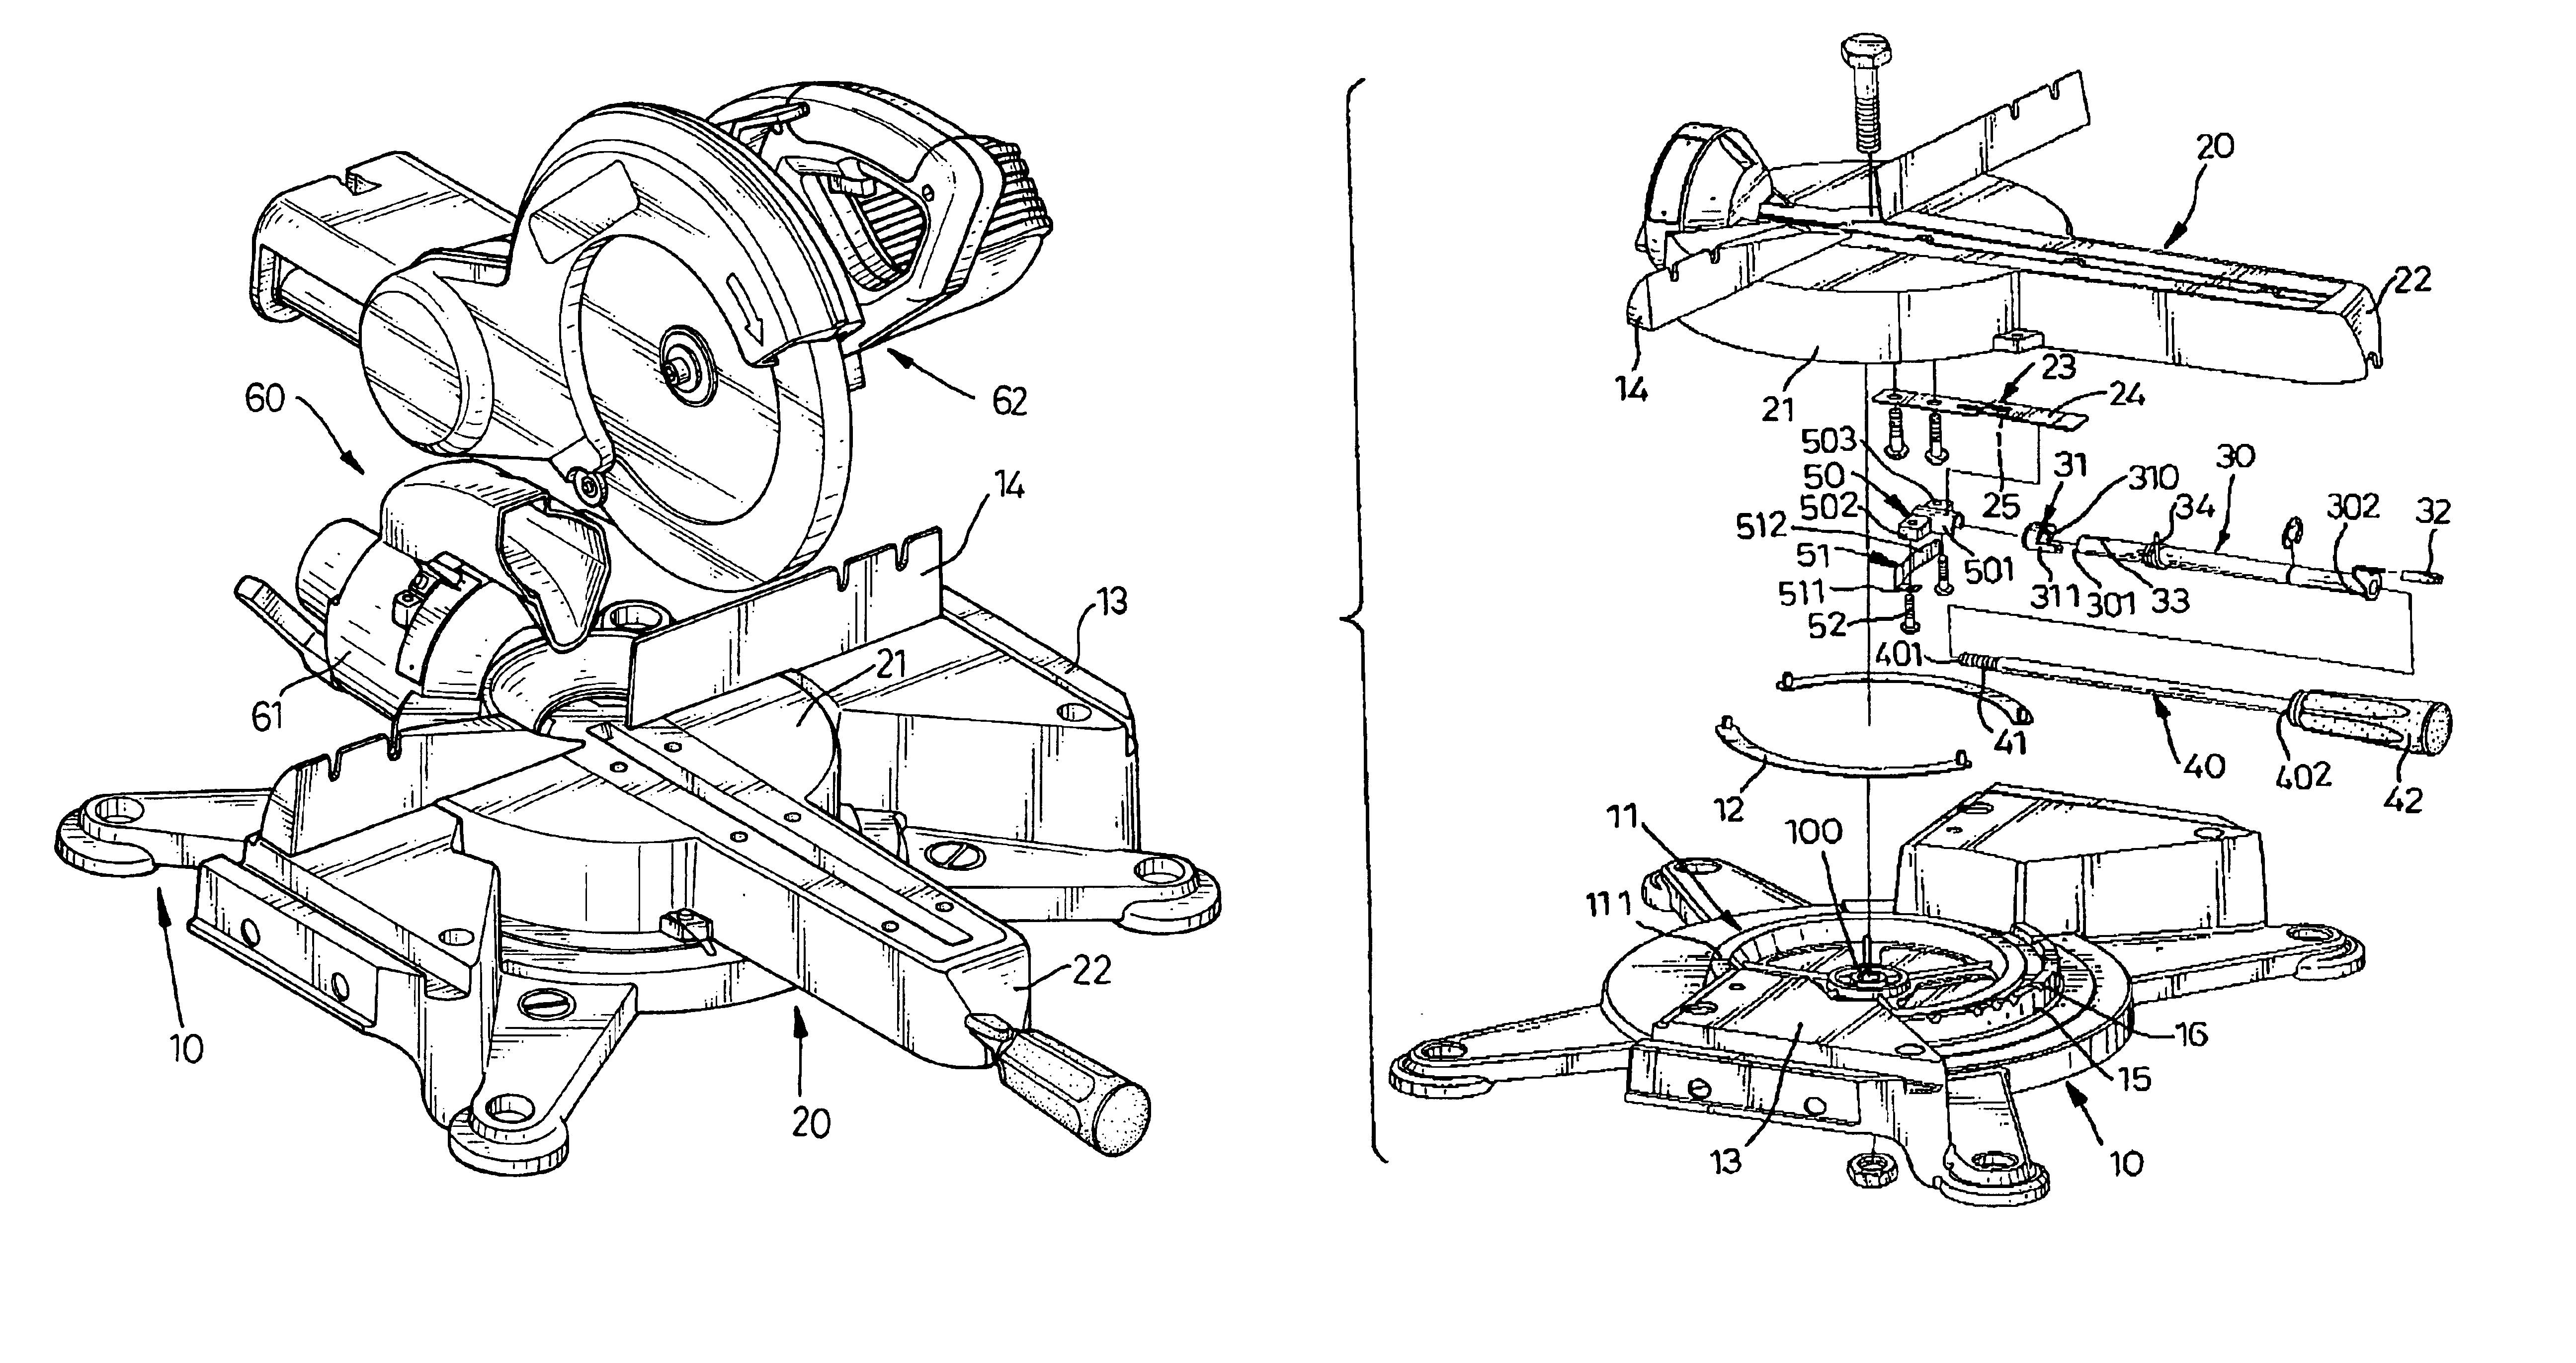 Adjustment device for a compound miter saw